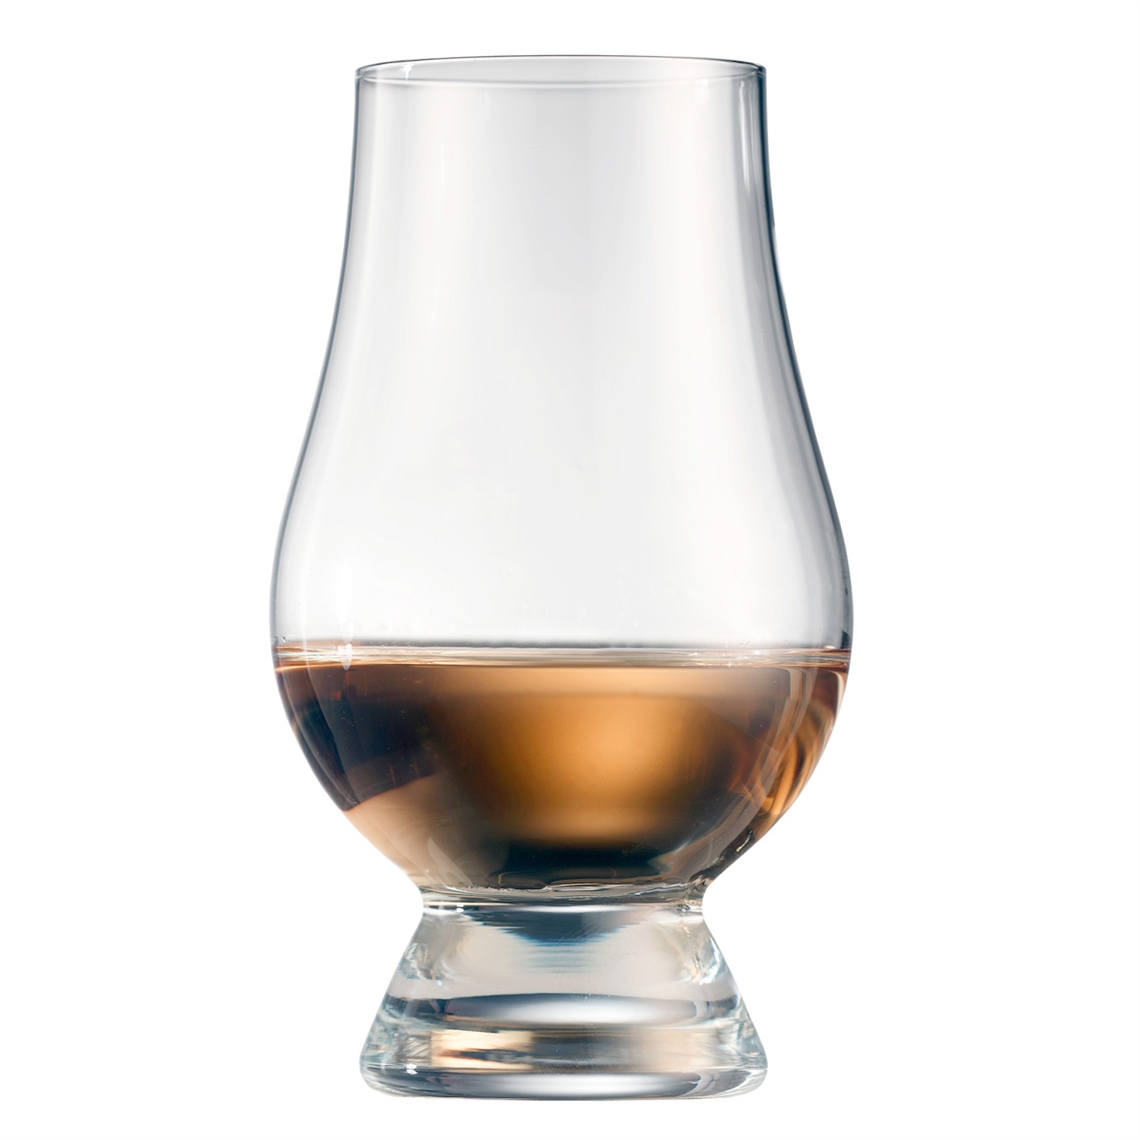 View more crystal wine glasses from our Whisky Glasses range